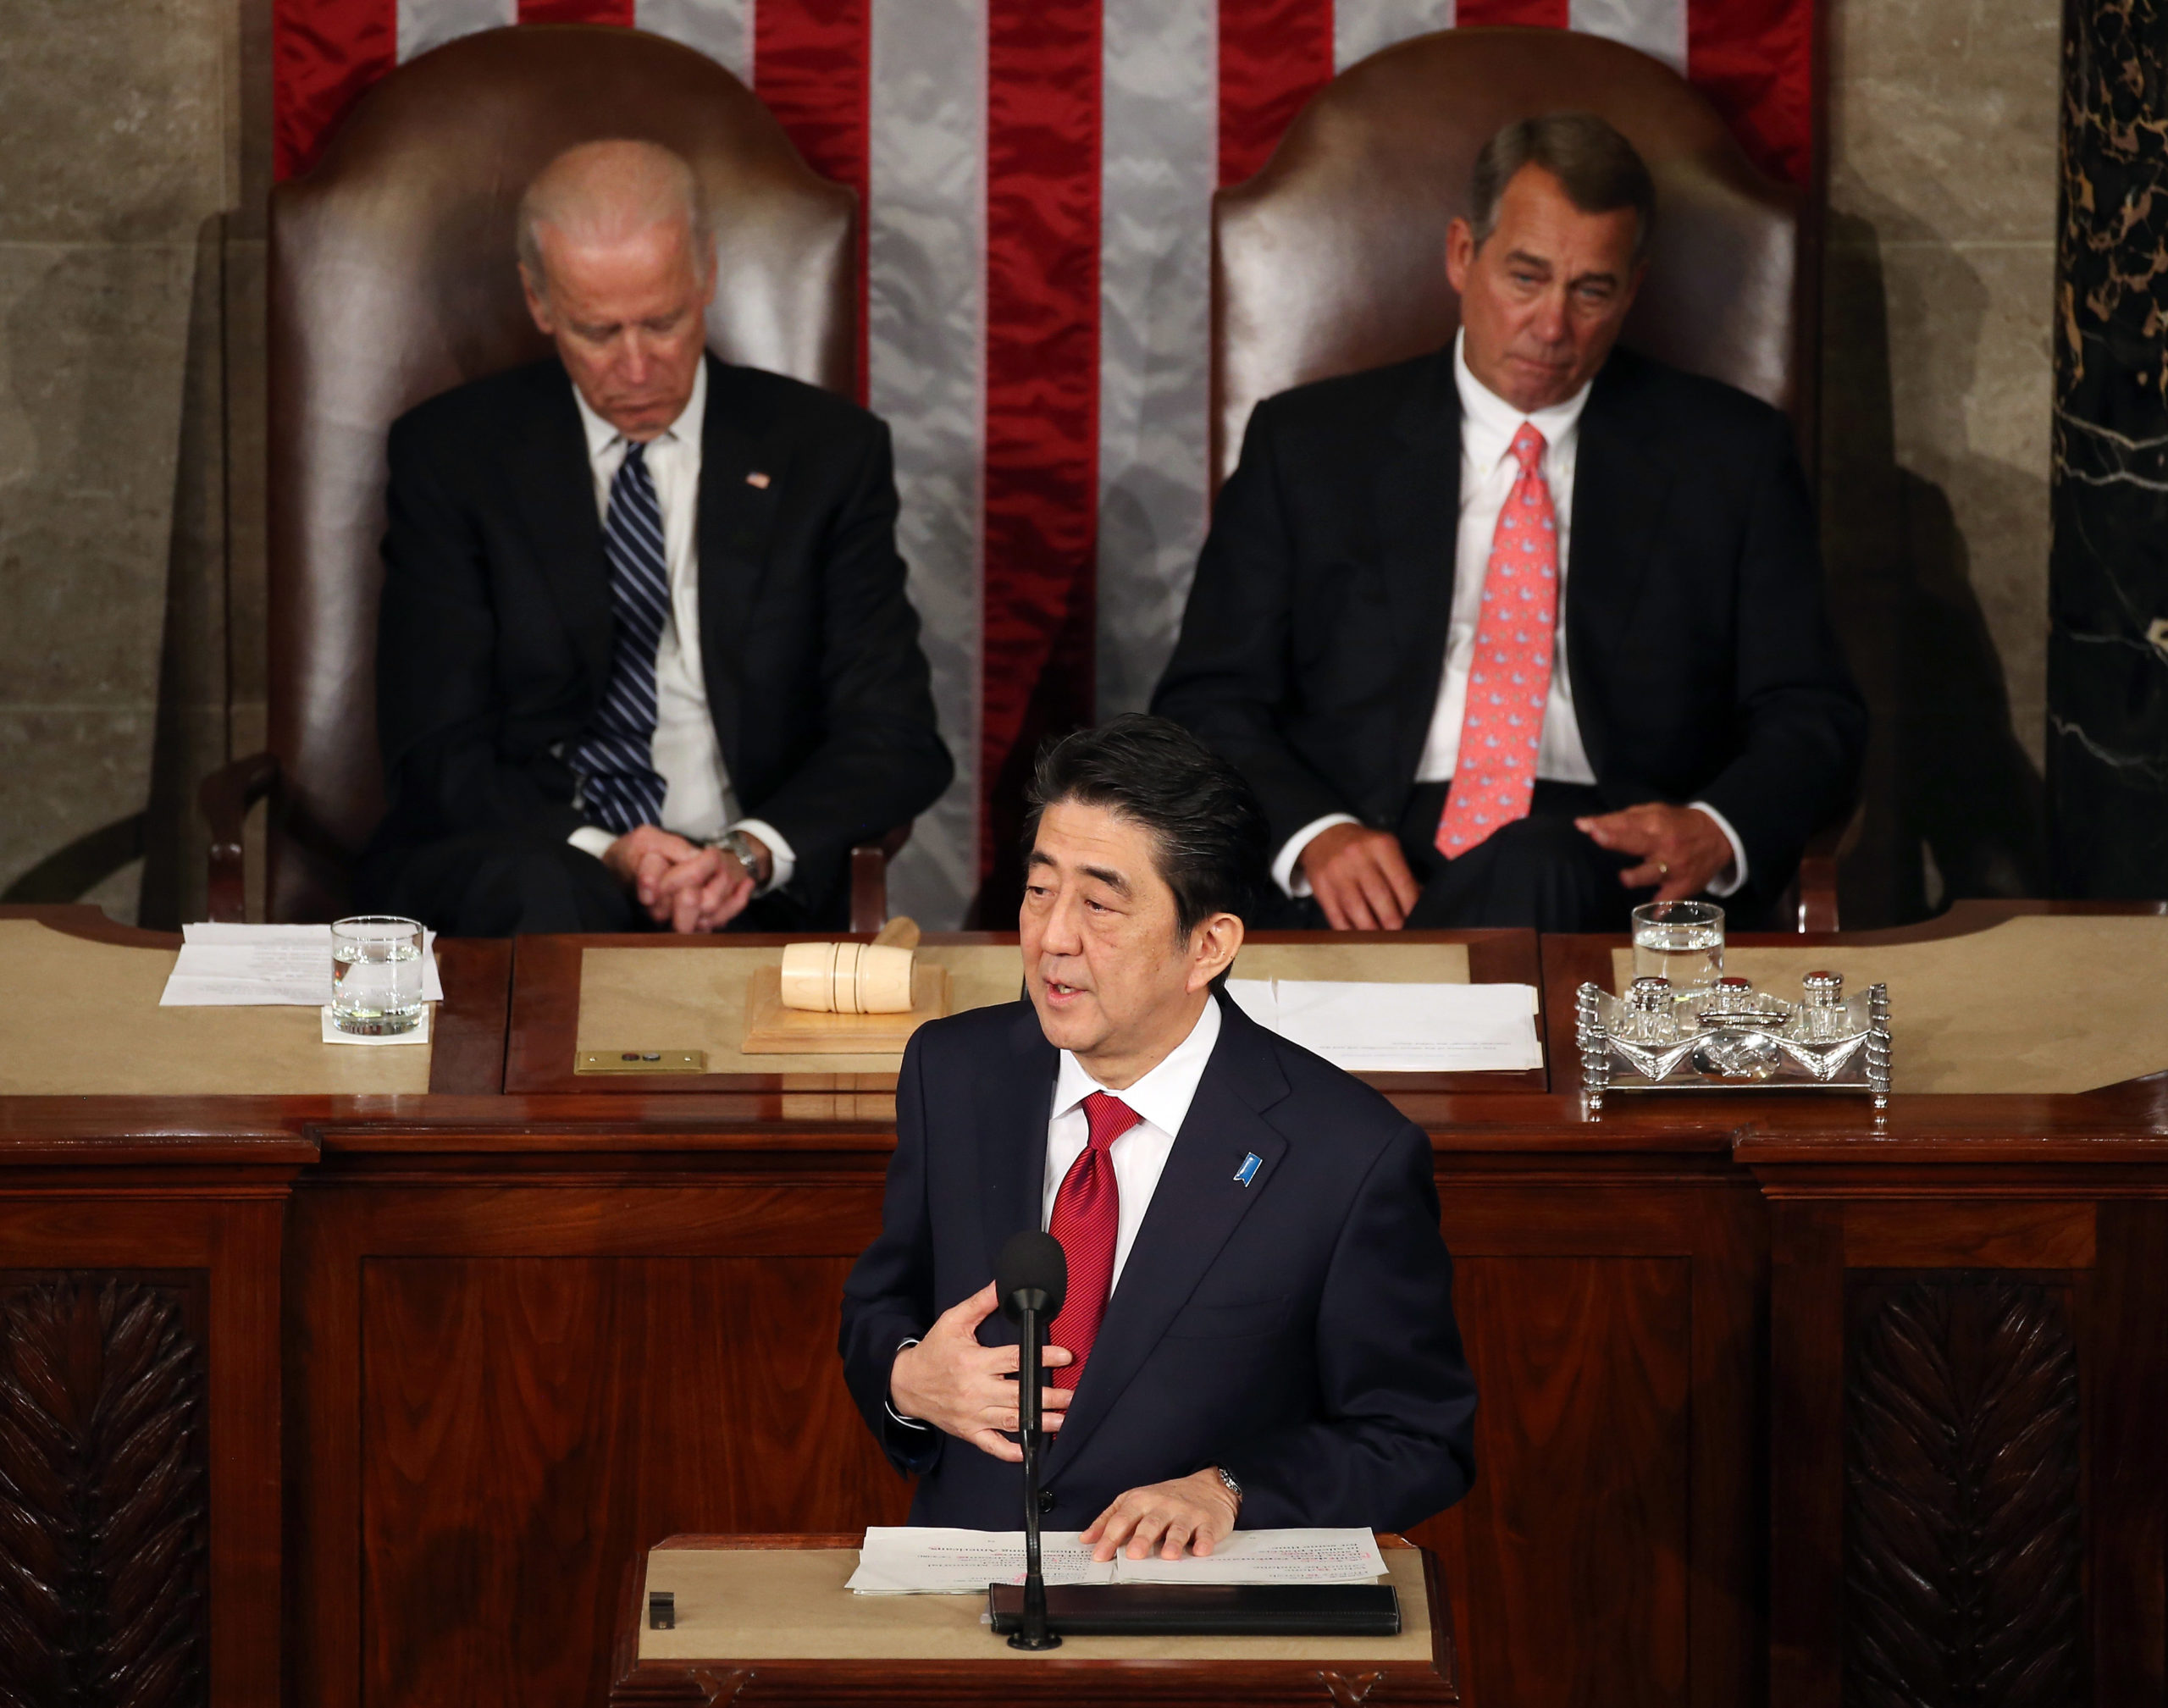 Prime Minister Shinzo Abe Address Joint Meeting Of Congress